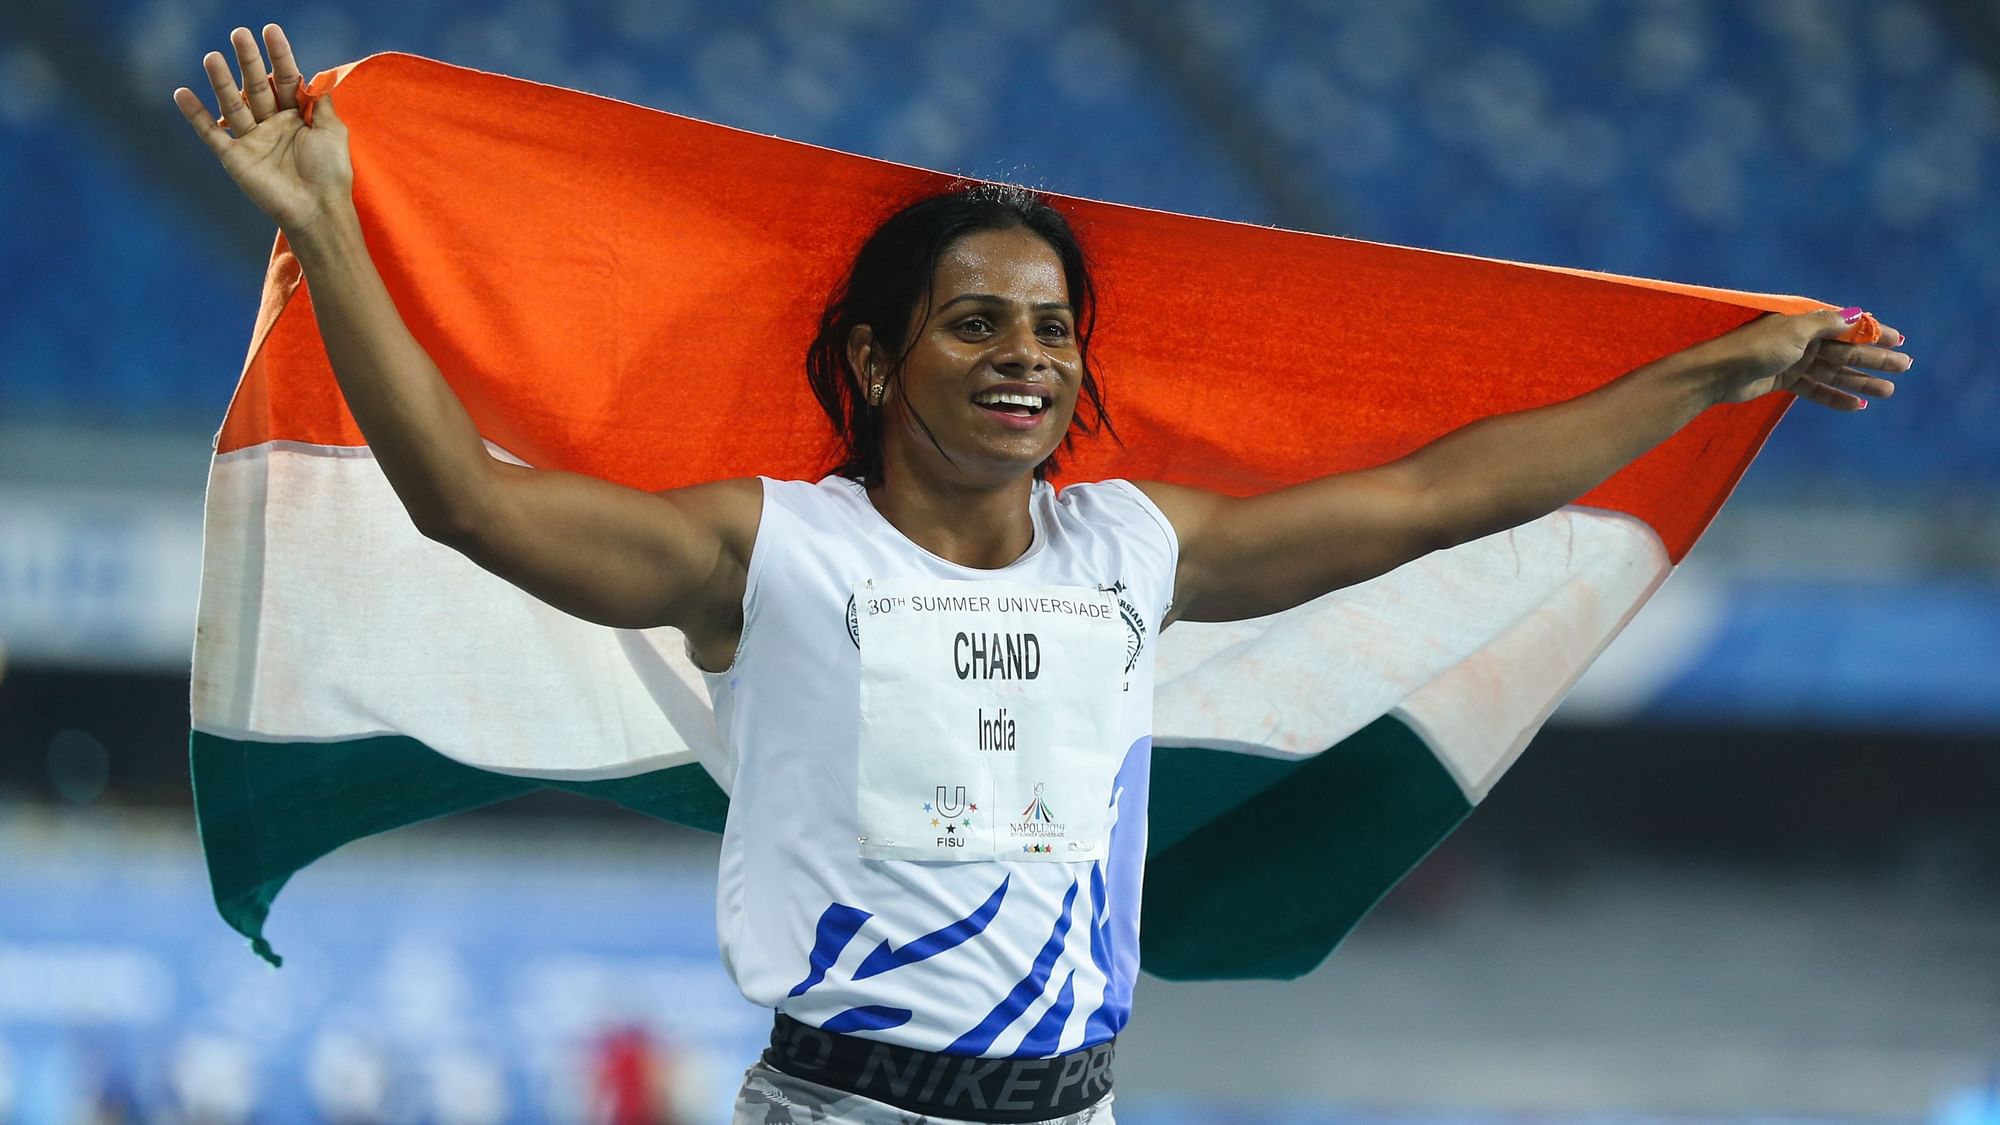 Dutee Chand had a dream outing at the World University Championship where she bagged a gold.